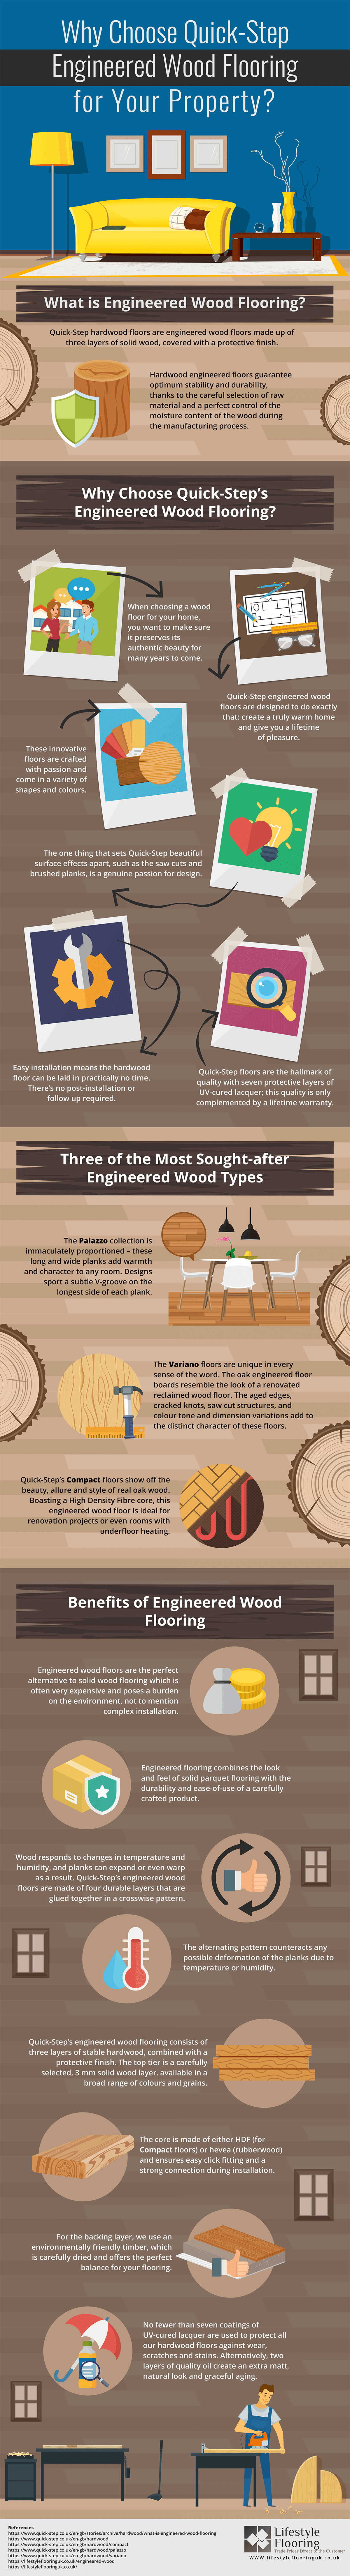 24 Lovable Engineered Hardwood Flooring Vs Hardwood Flooring 2024 free download engineered hardwood flooring vs hardwood flooring of why choose quick step engineered wood flooring csw regarding if youre looking to find out more information this infographic below from li